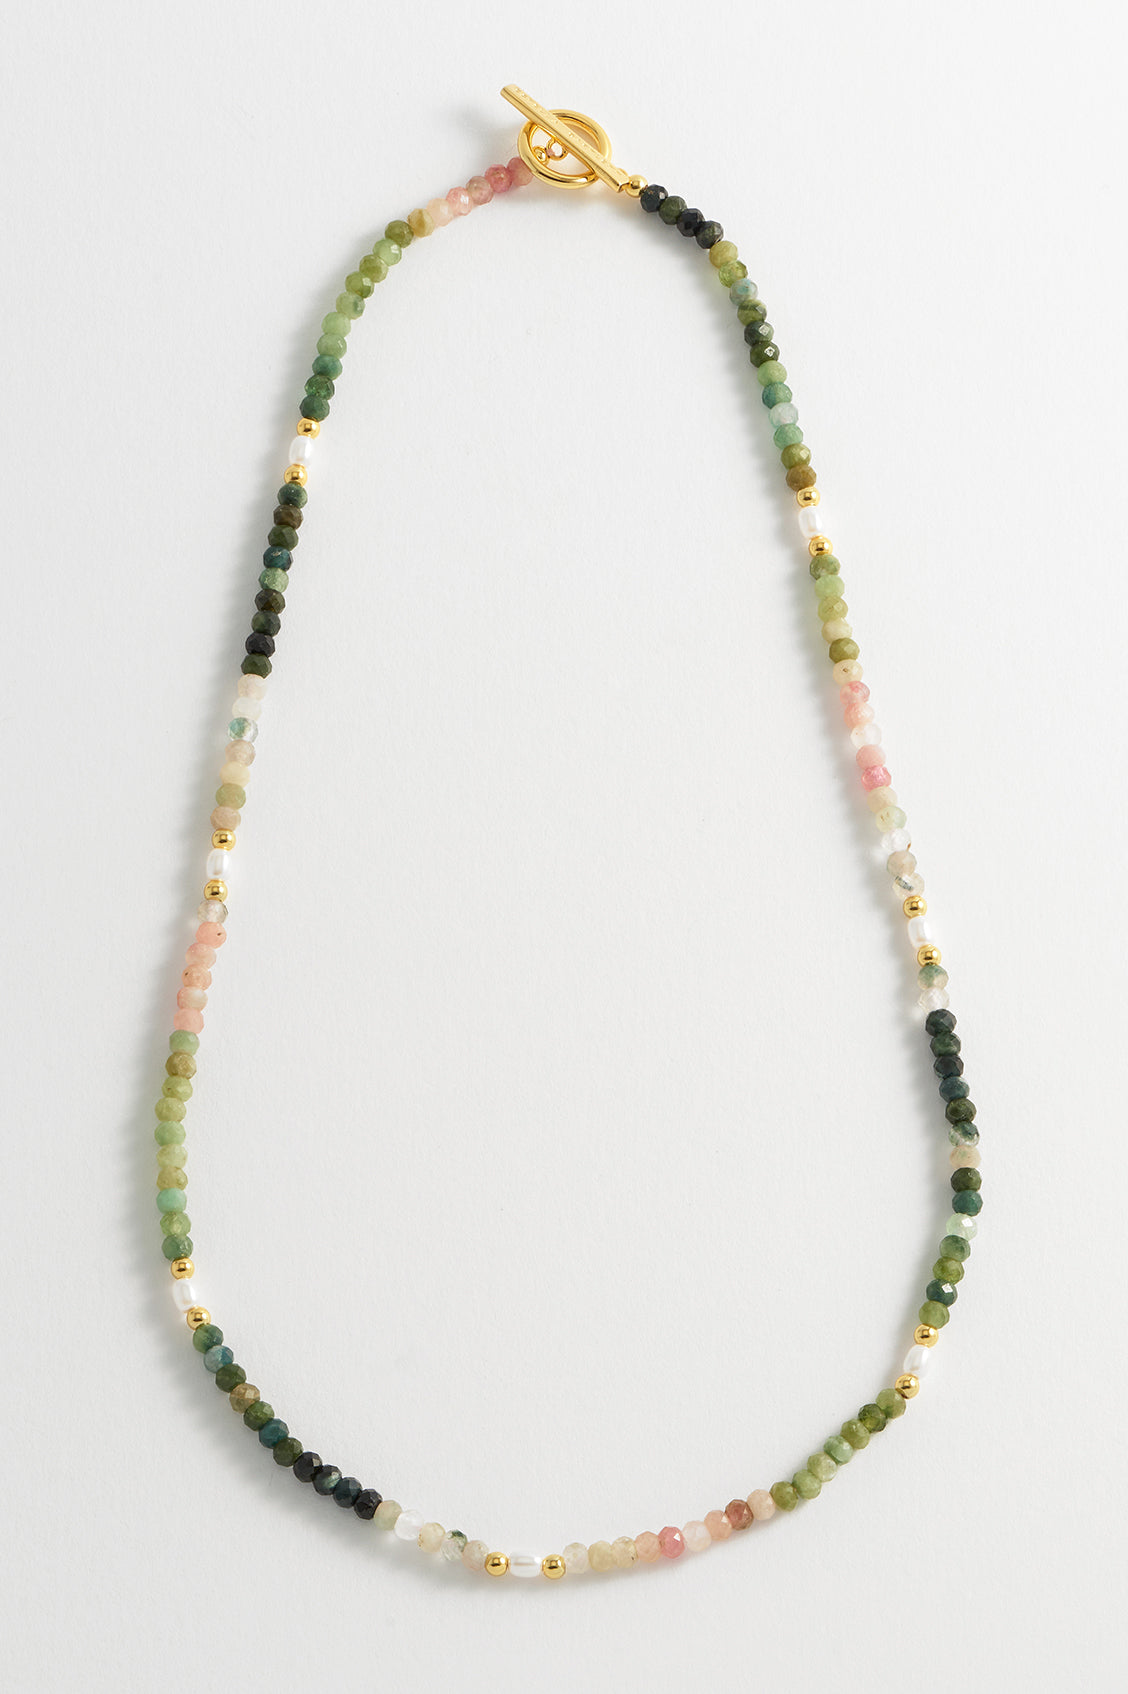 Grey Pearl and Tourmaline Bead Necklace — The Watchmaker's Daughter